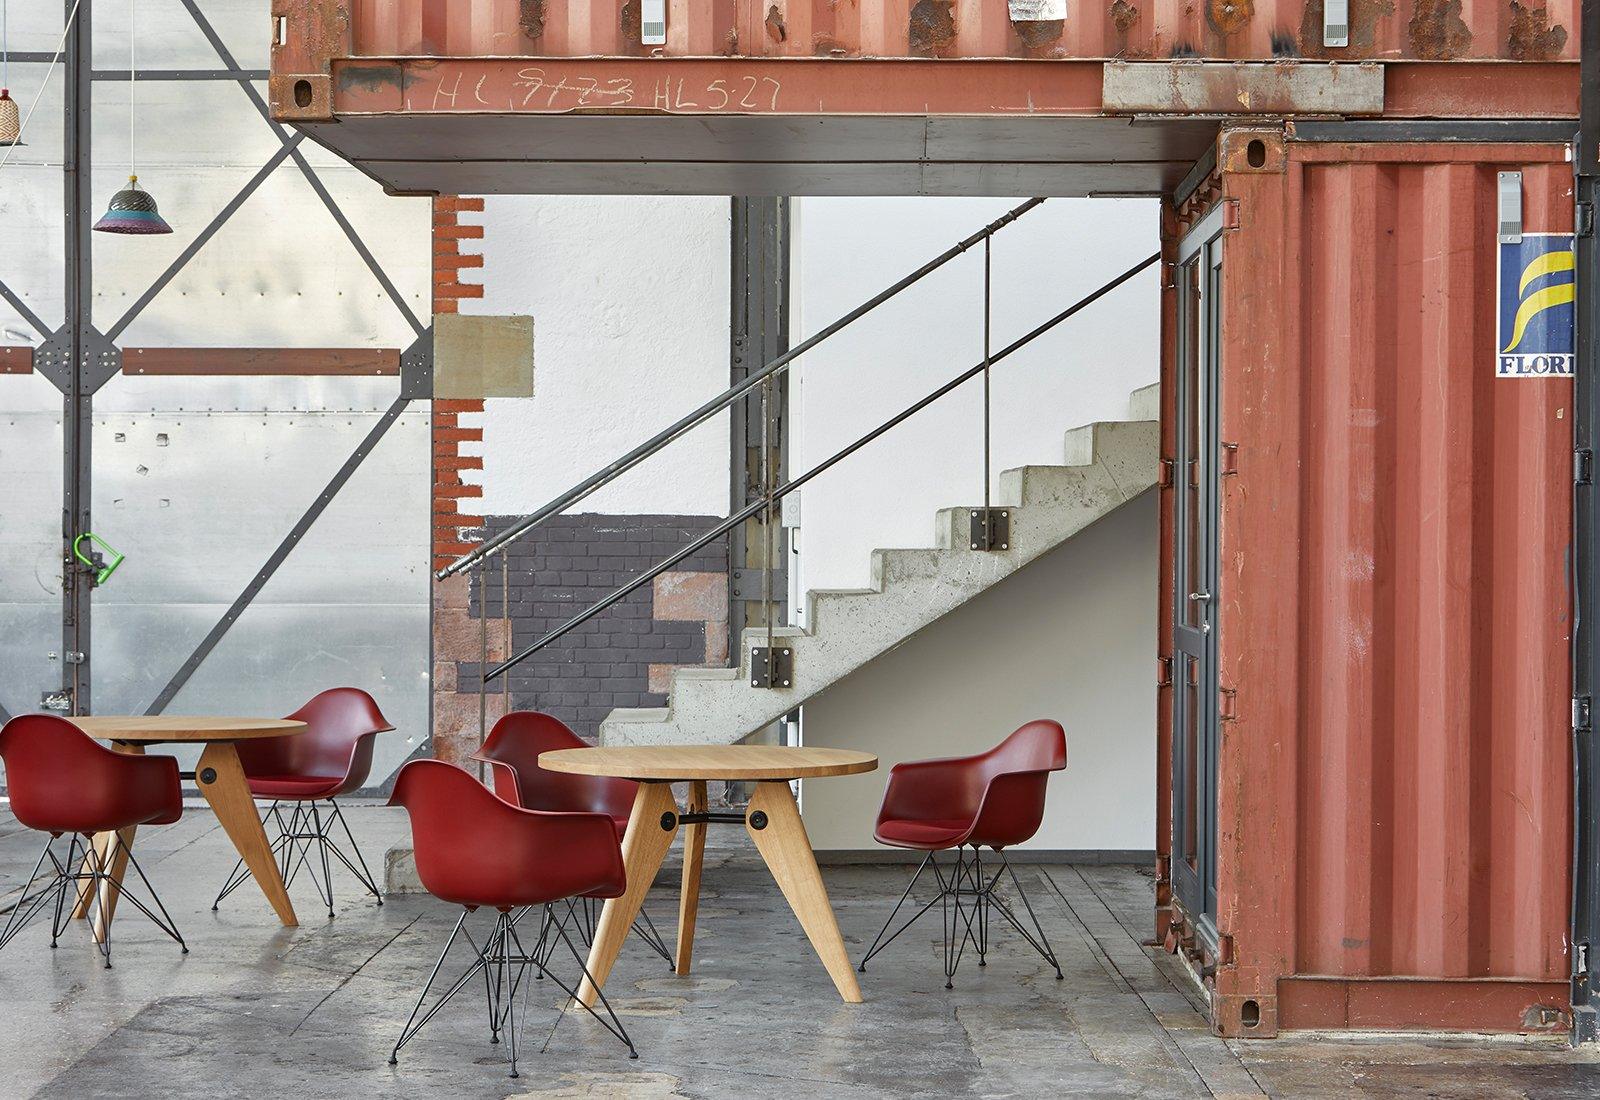  A collection of red Eames DAR Armchair by Charles + Ray Eames for Vitra around wooden tables.